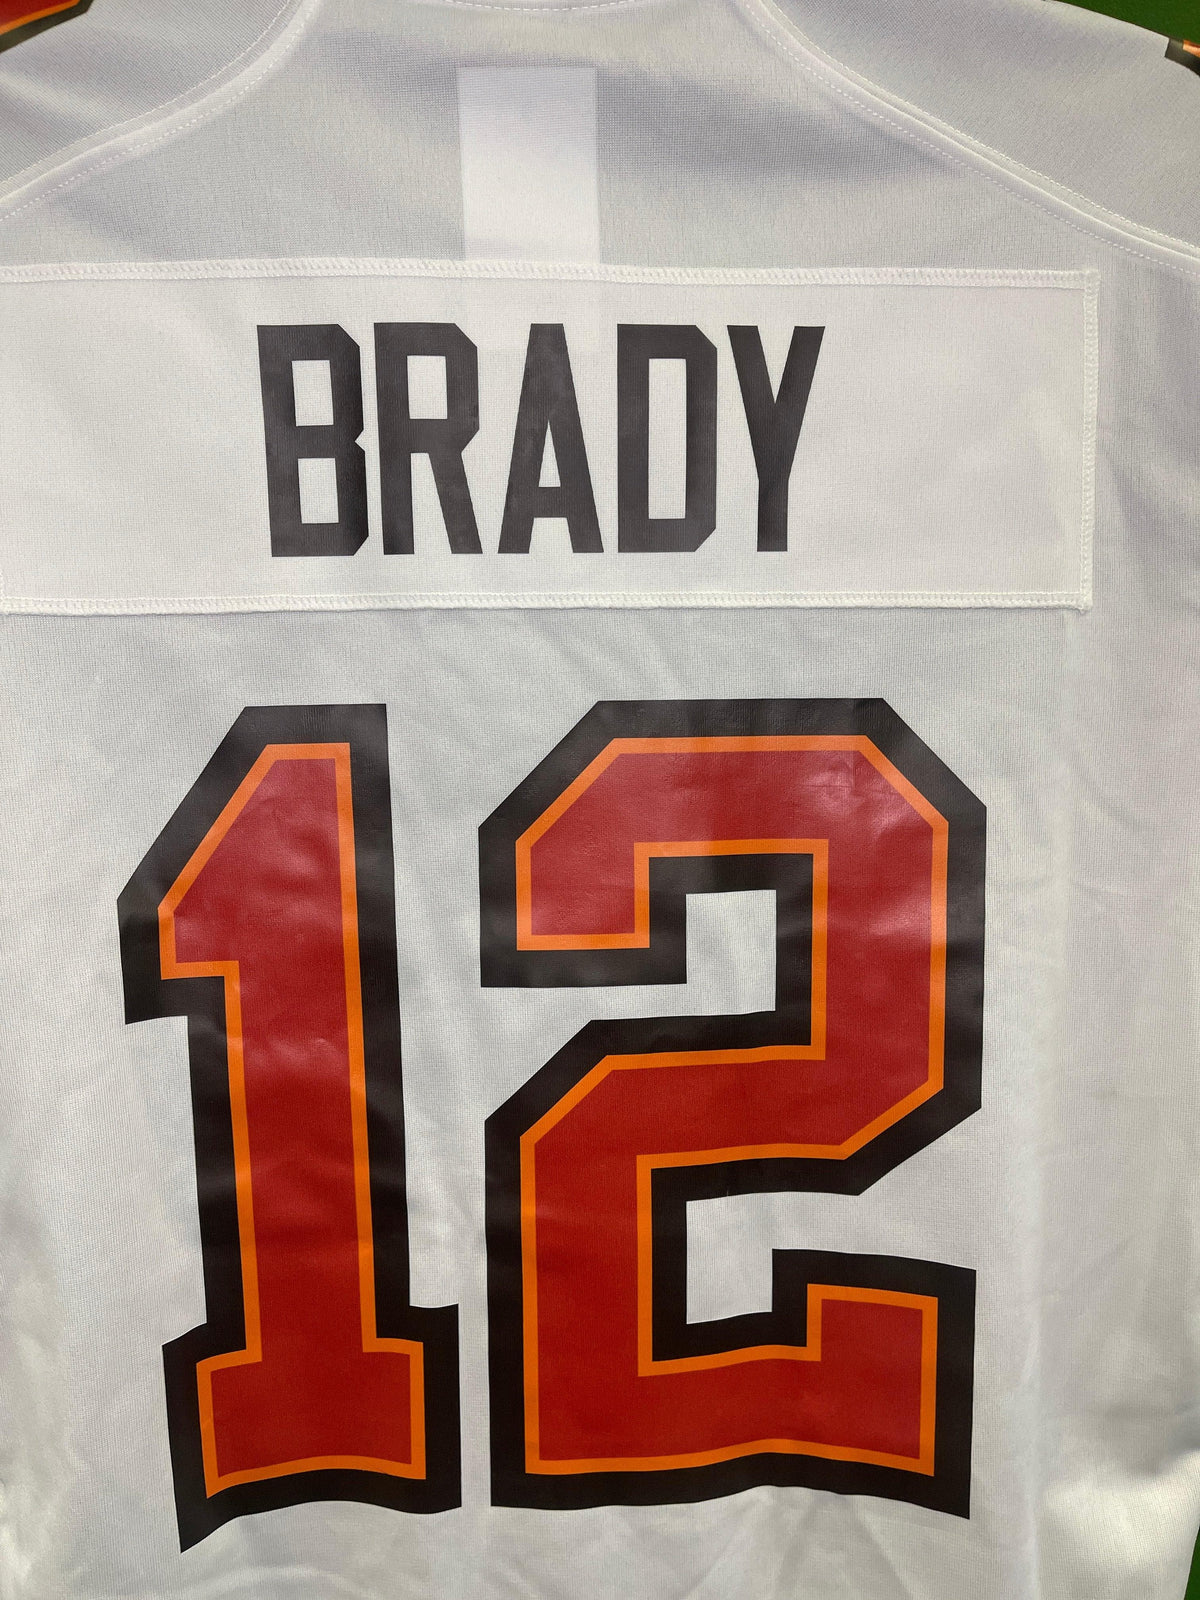 NFL Tampa Bay Buccaneers Tom Brady #12 Game Jersey Men's Small NWT